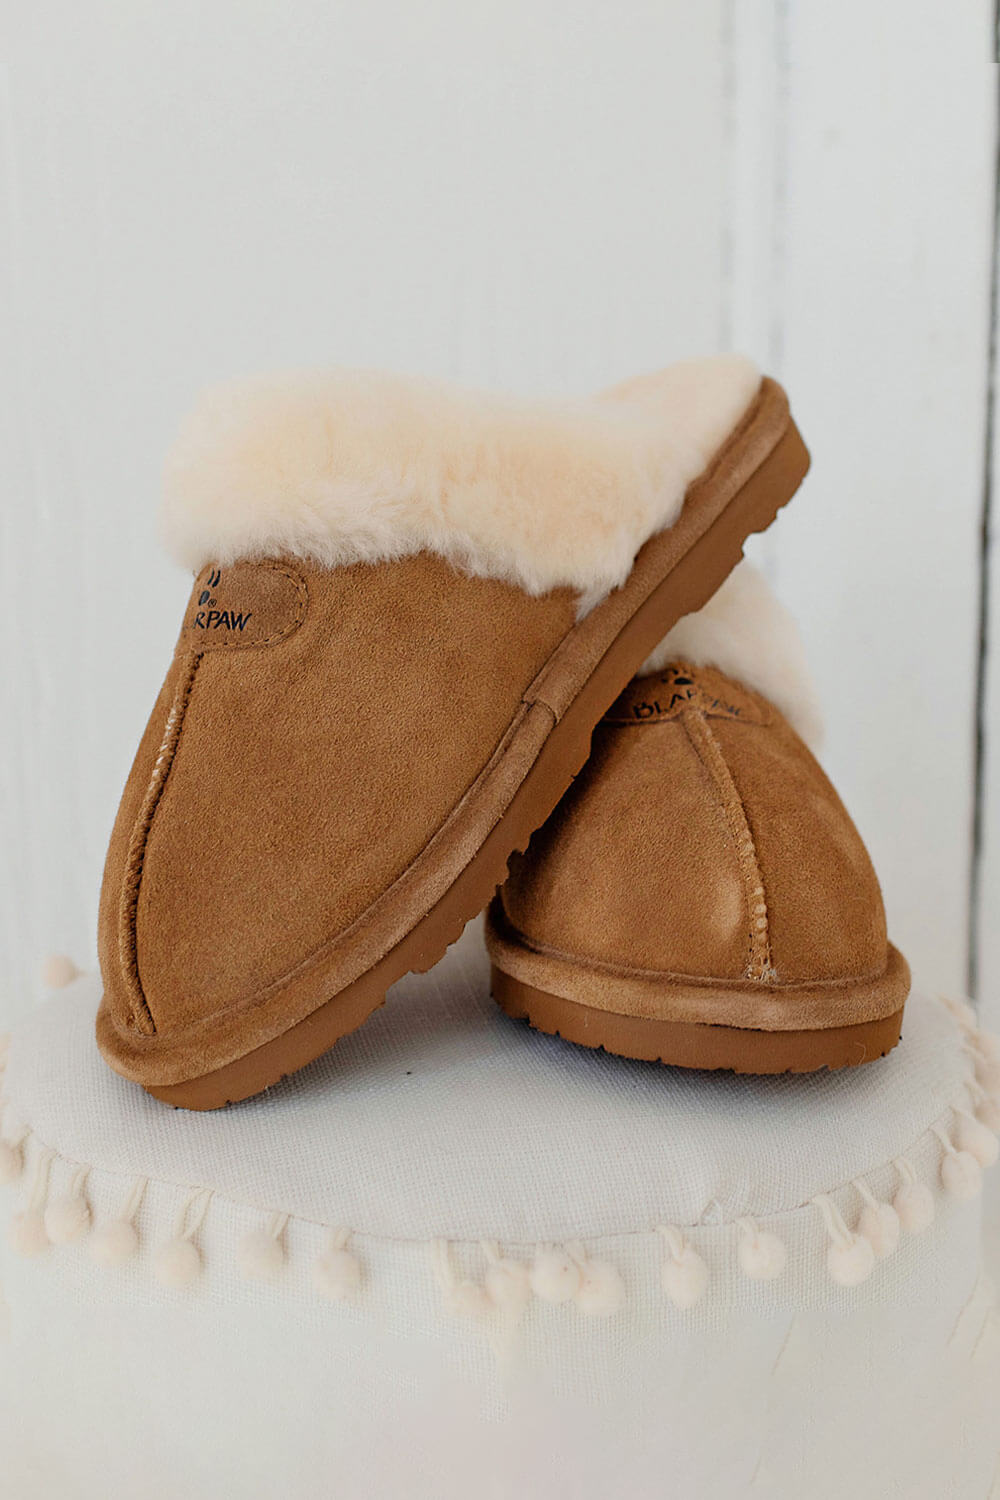 Bearpaw Casual Slippers Womens Effie Cable Knit Round Toe 1674W | eBay